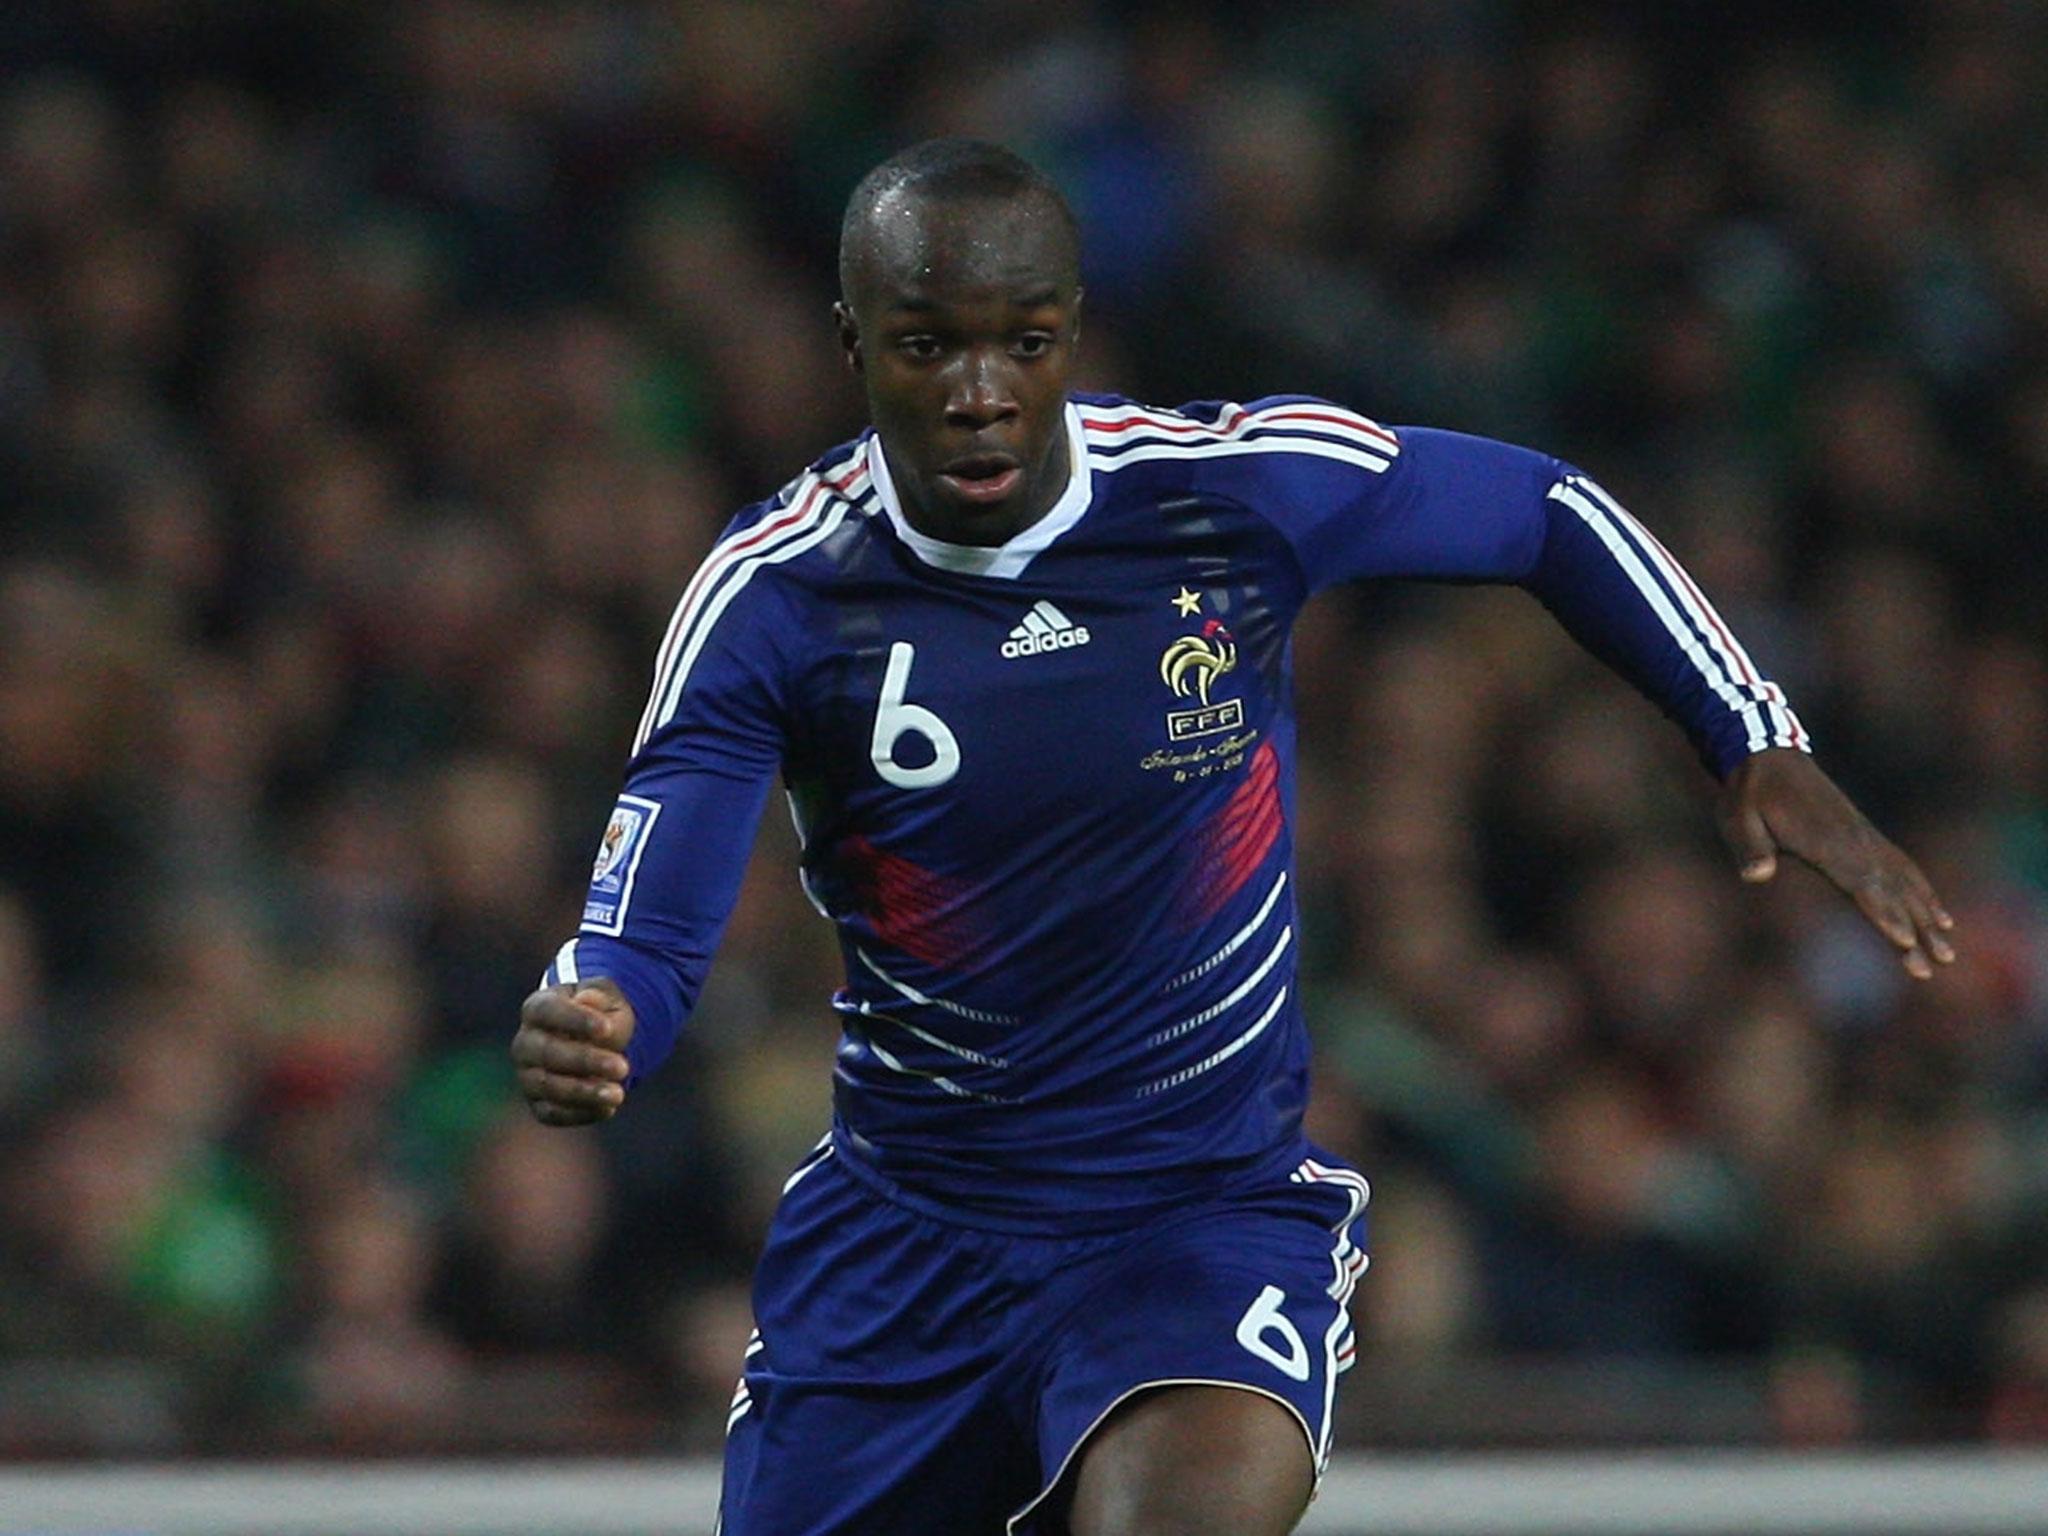 Diarra played under Mourinho at both Chelsea and Real Madrid